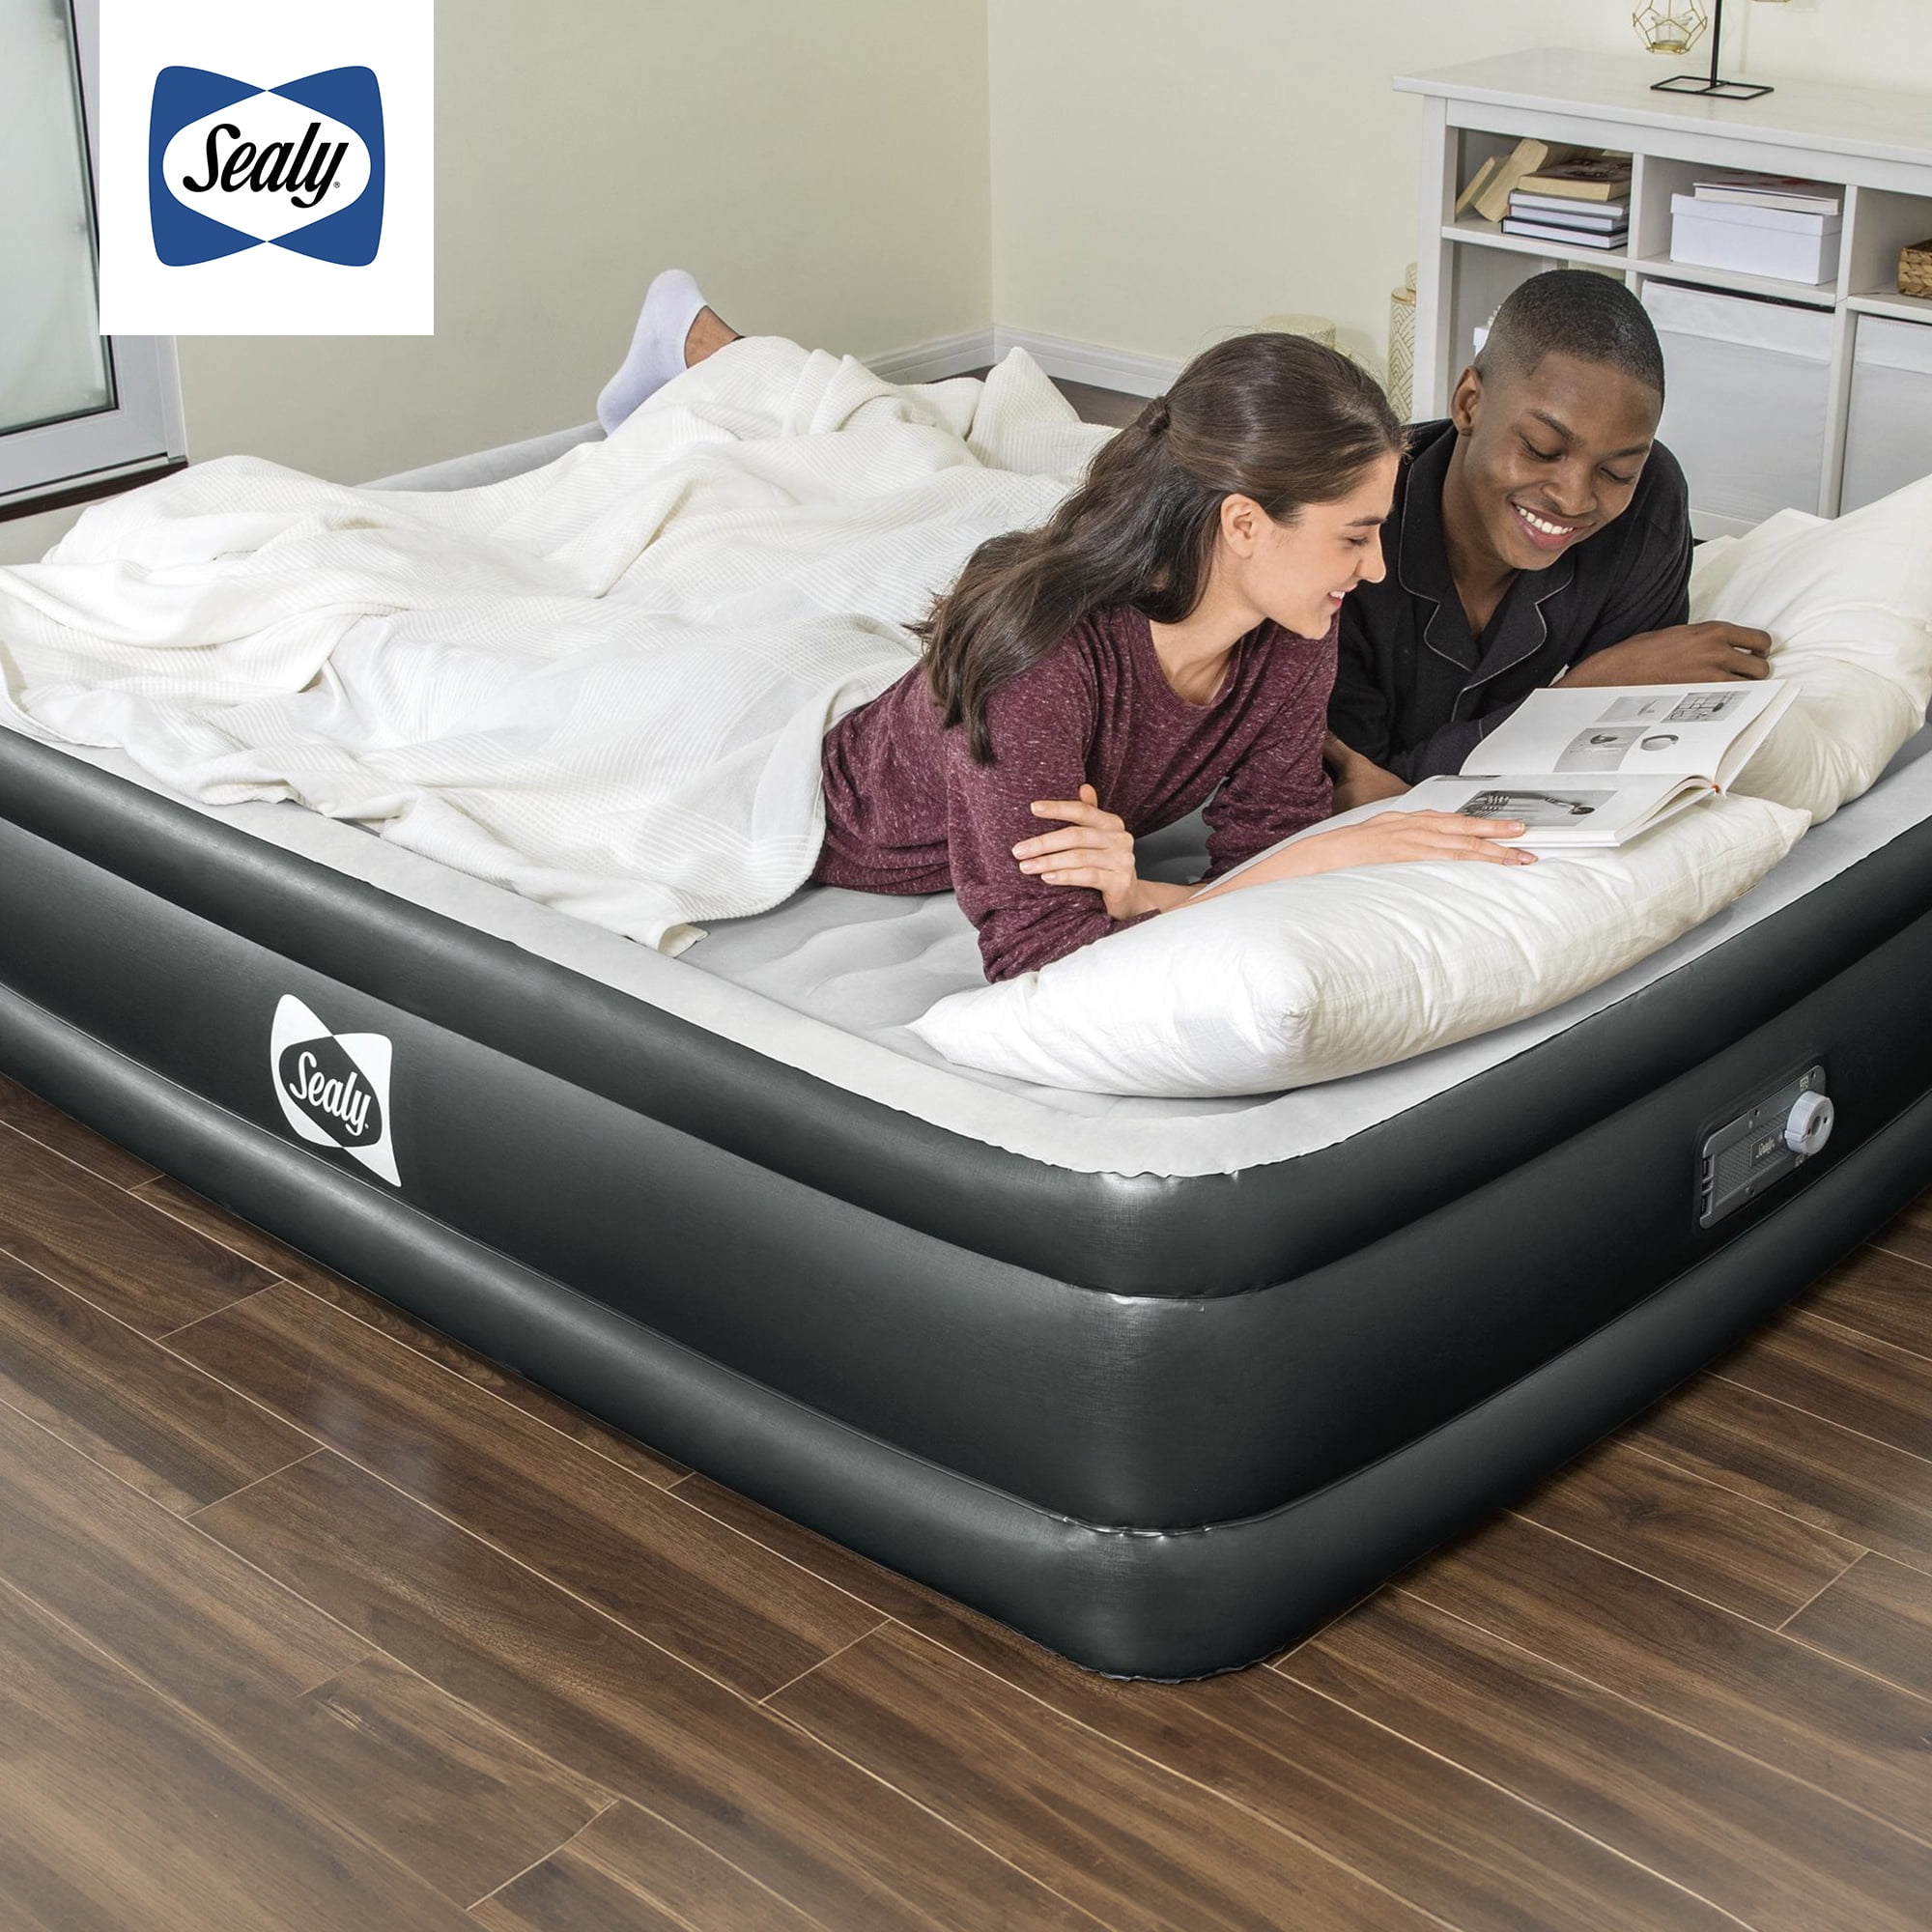 Bestway: Tritech Queen 18 Air Mattress - Built-in AC Pump, Auto Inflation  & Deflation, Firm Comfort Level, Antimicrobial, 2 Person Weight Capacity  661 lbs. 